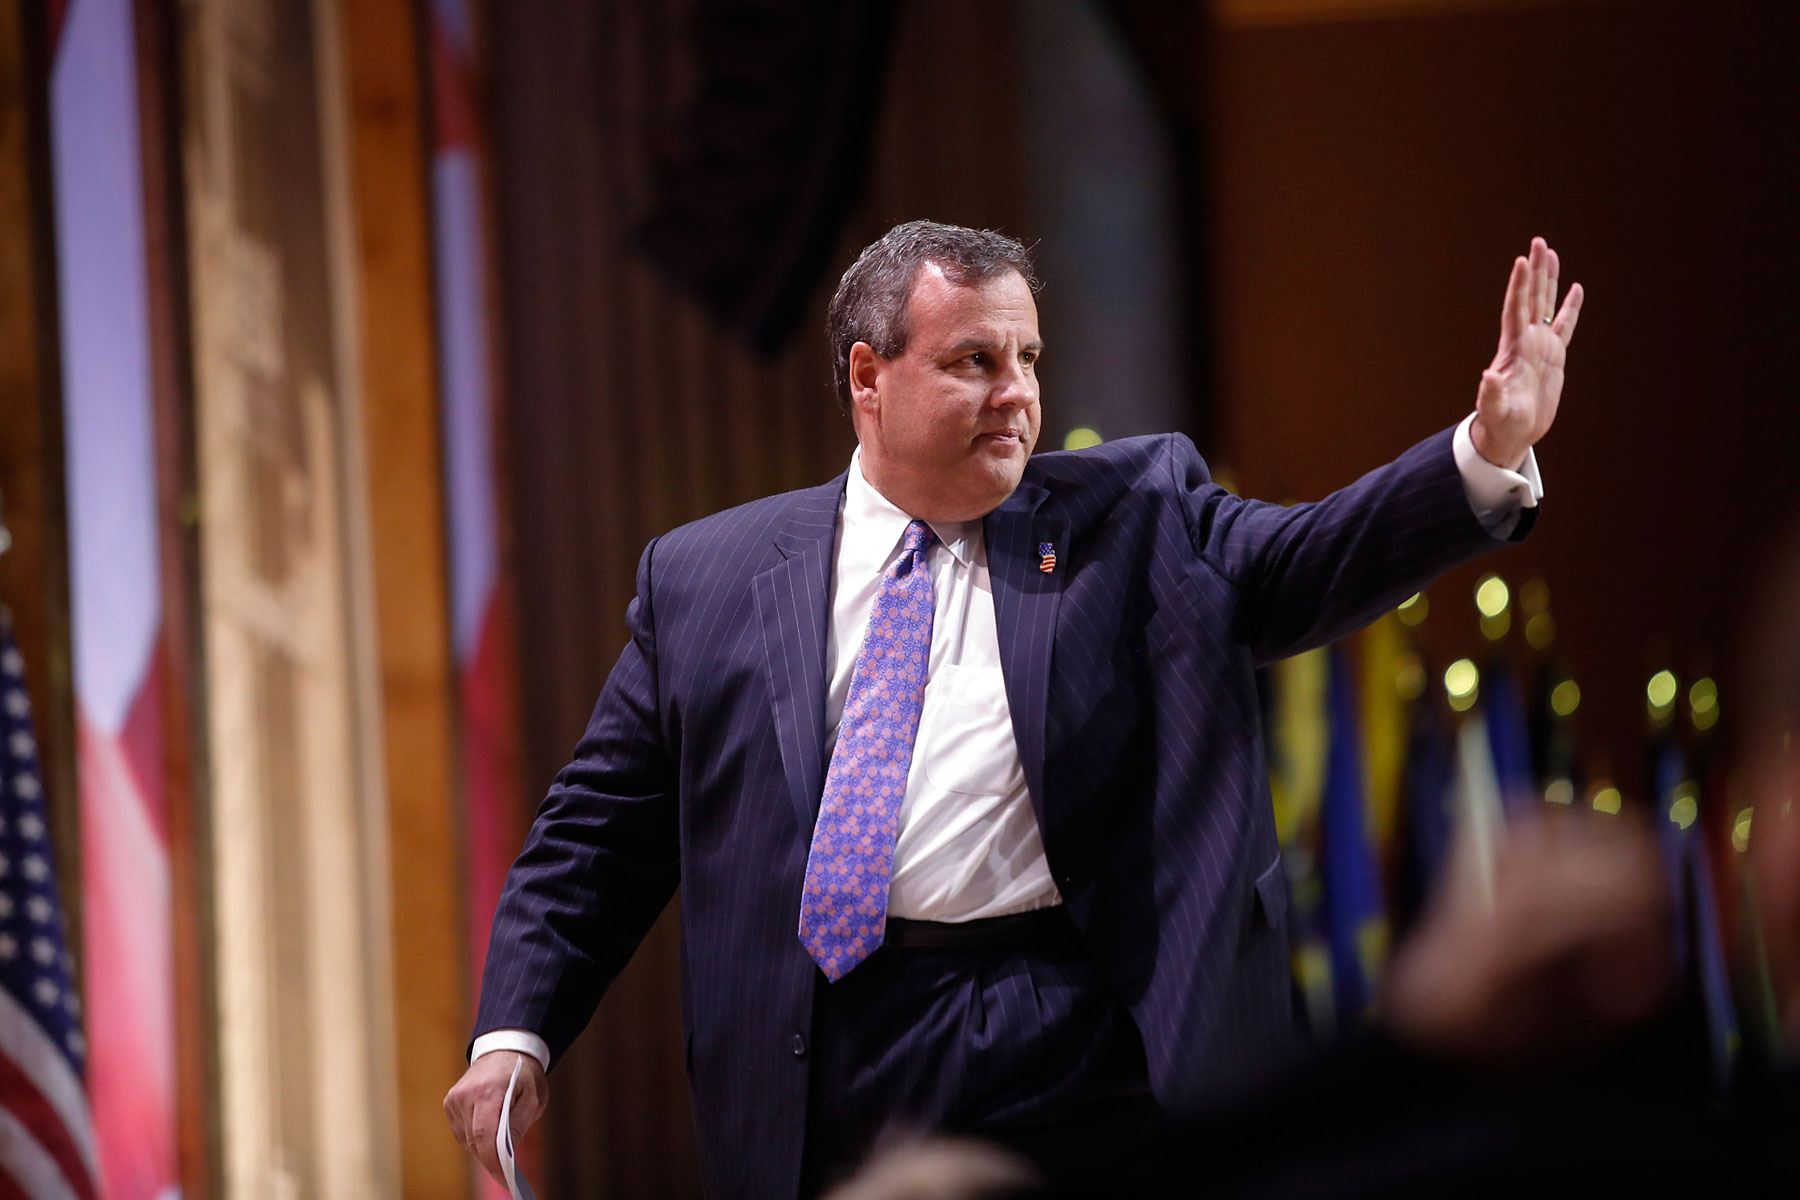 New Jersey Governor Chris Christie speaks during the Conservative Political Action Conference at the Gaylord National Resort &amp; Convention Center in National Harbor, Md., March 6, 2014. (Lexey Swall—GRAIN for TIME)